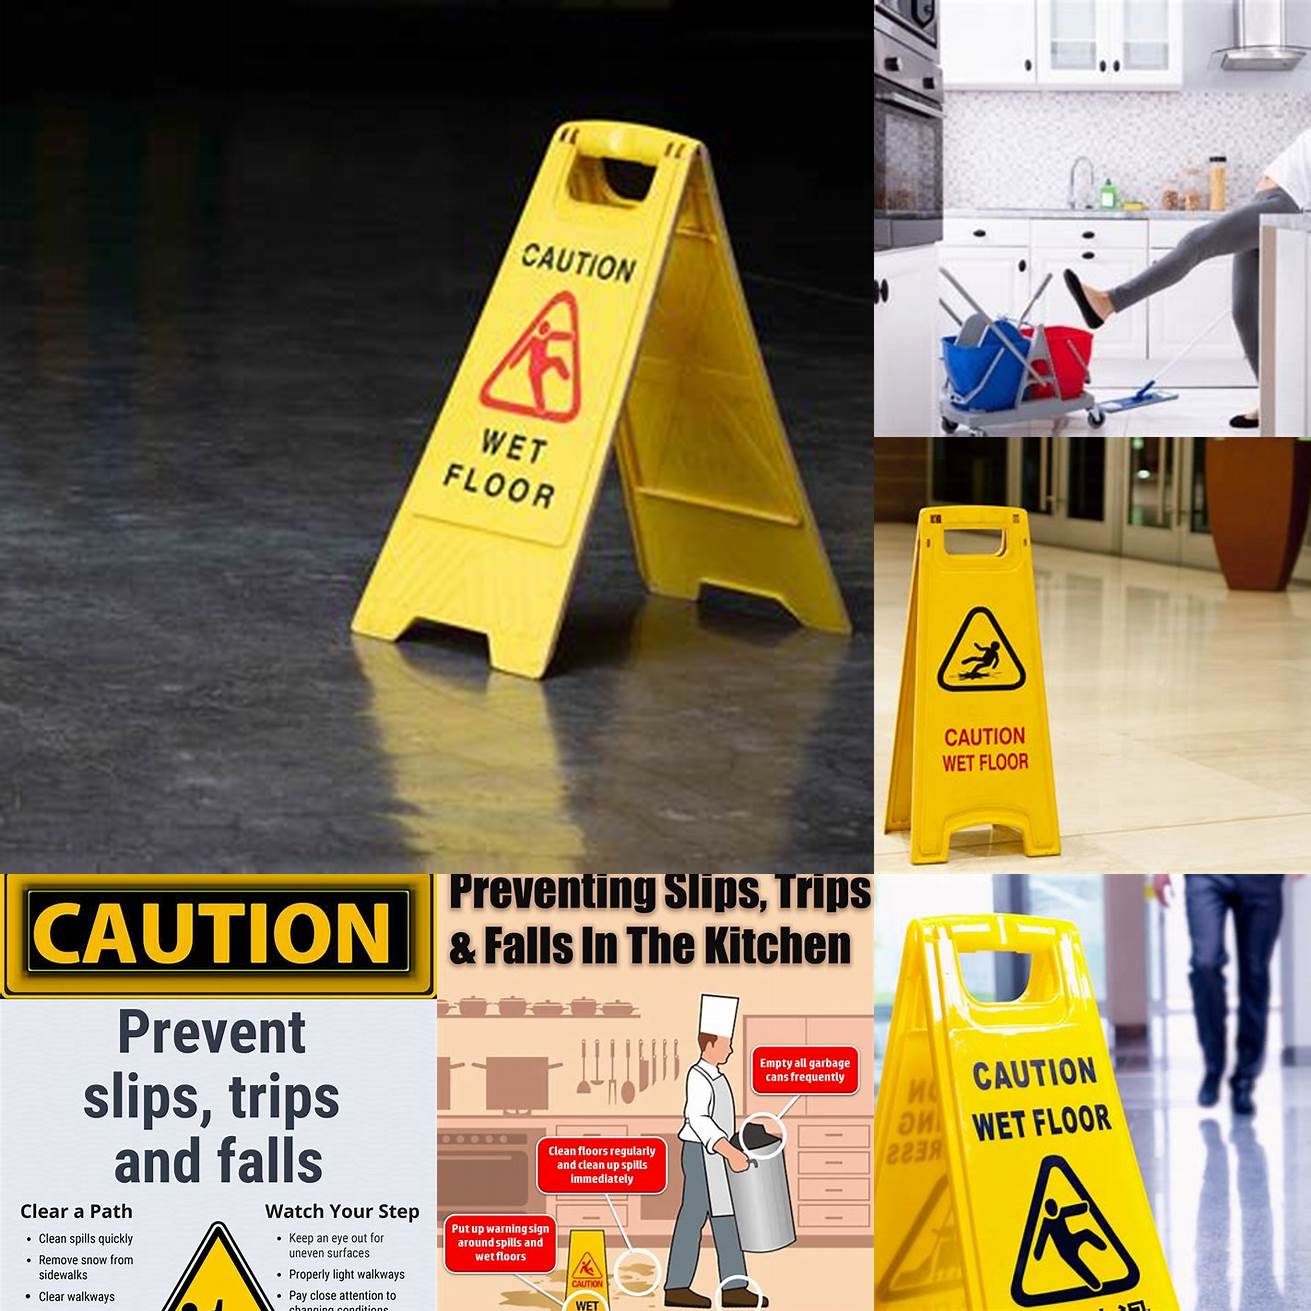 2 Prevents Slips and Falls Kitchen floors can get wet and slippery making it dangerous to walk on A kitchen mat provides a non-slip surface reducing the risk of slips and falls